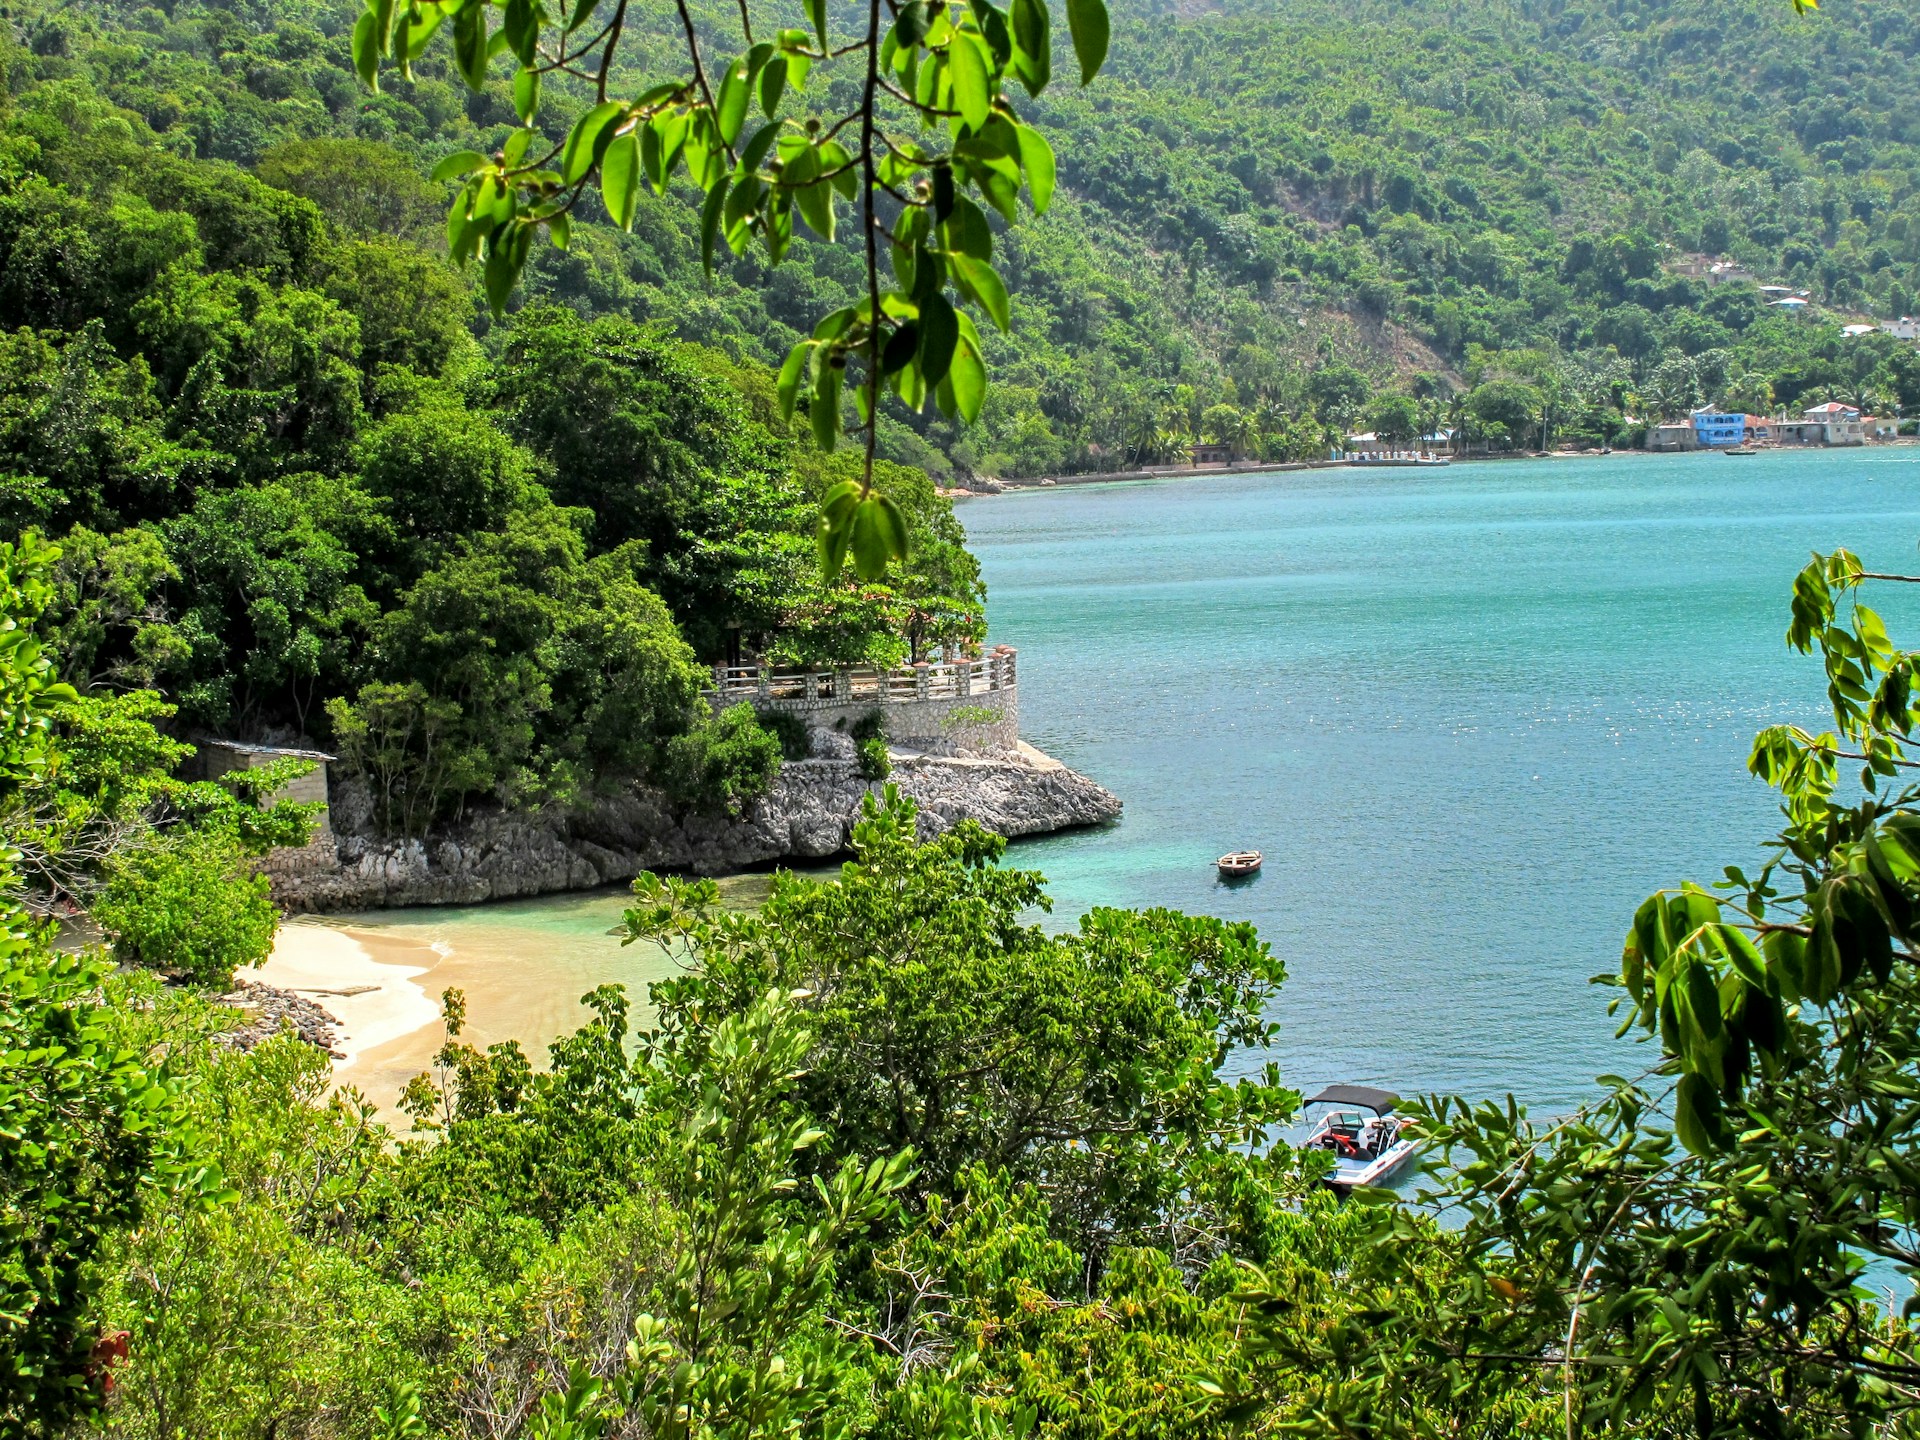 Beautiful view of  a small private beach in Labadee, Haiti with the ocean and big trees in the background.